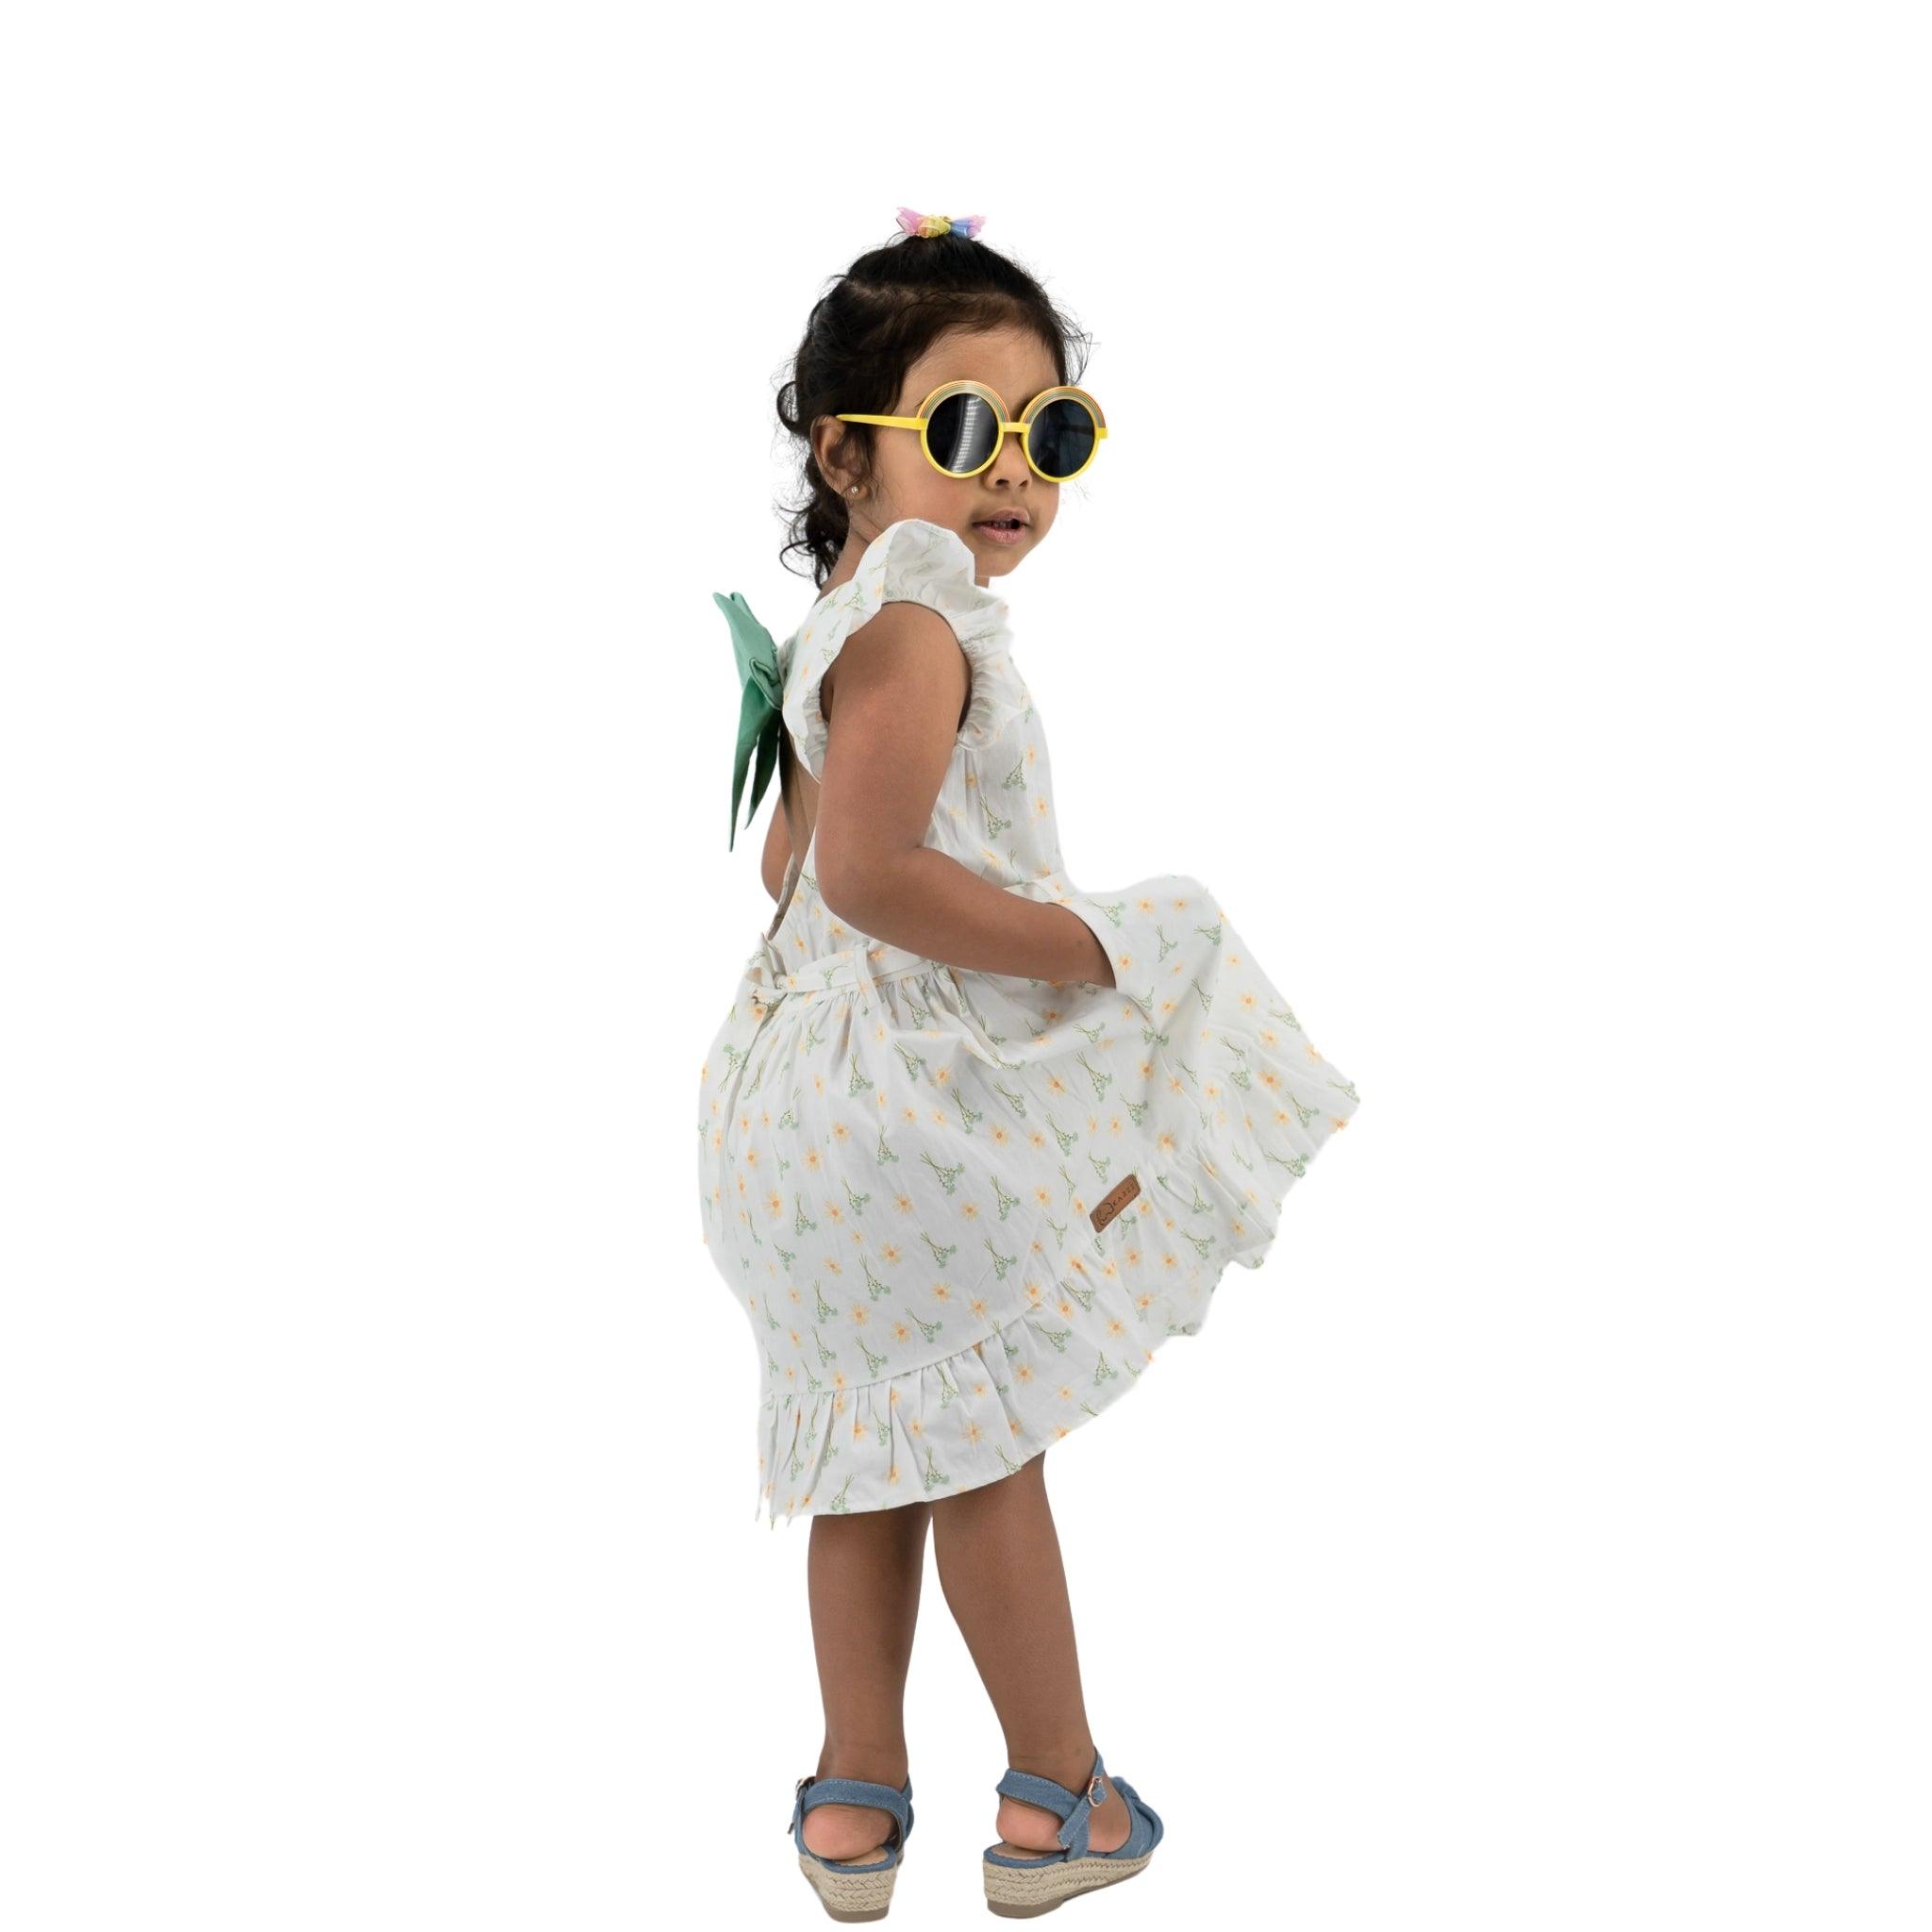 Young girl in a Karee Petite Blossom Cotton Dress in Smoked Pearl and yellow sunglasses turning playfully, isolated on white background.